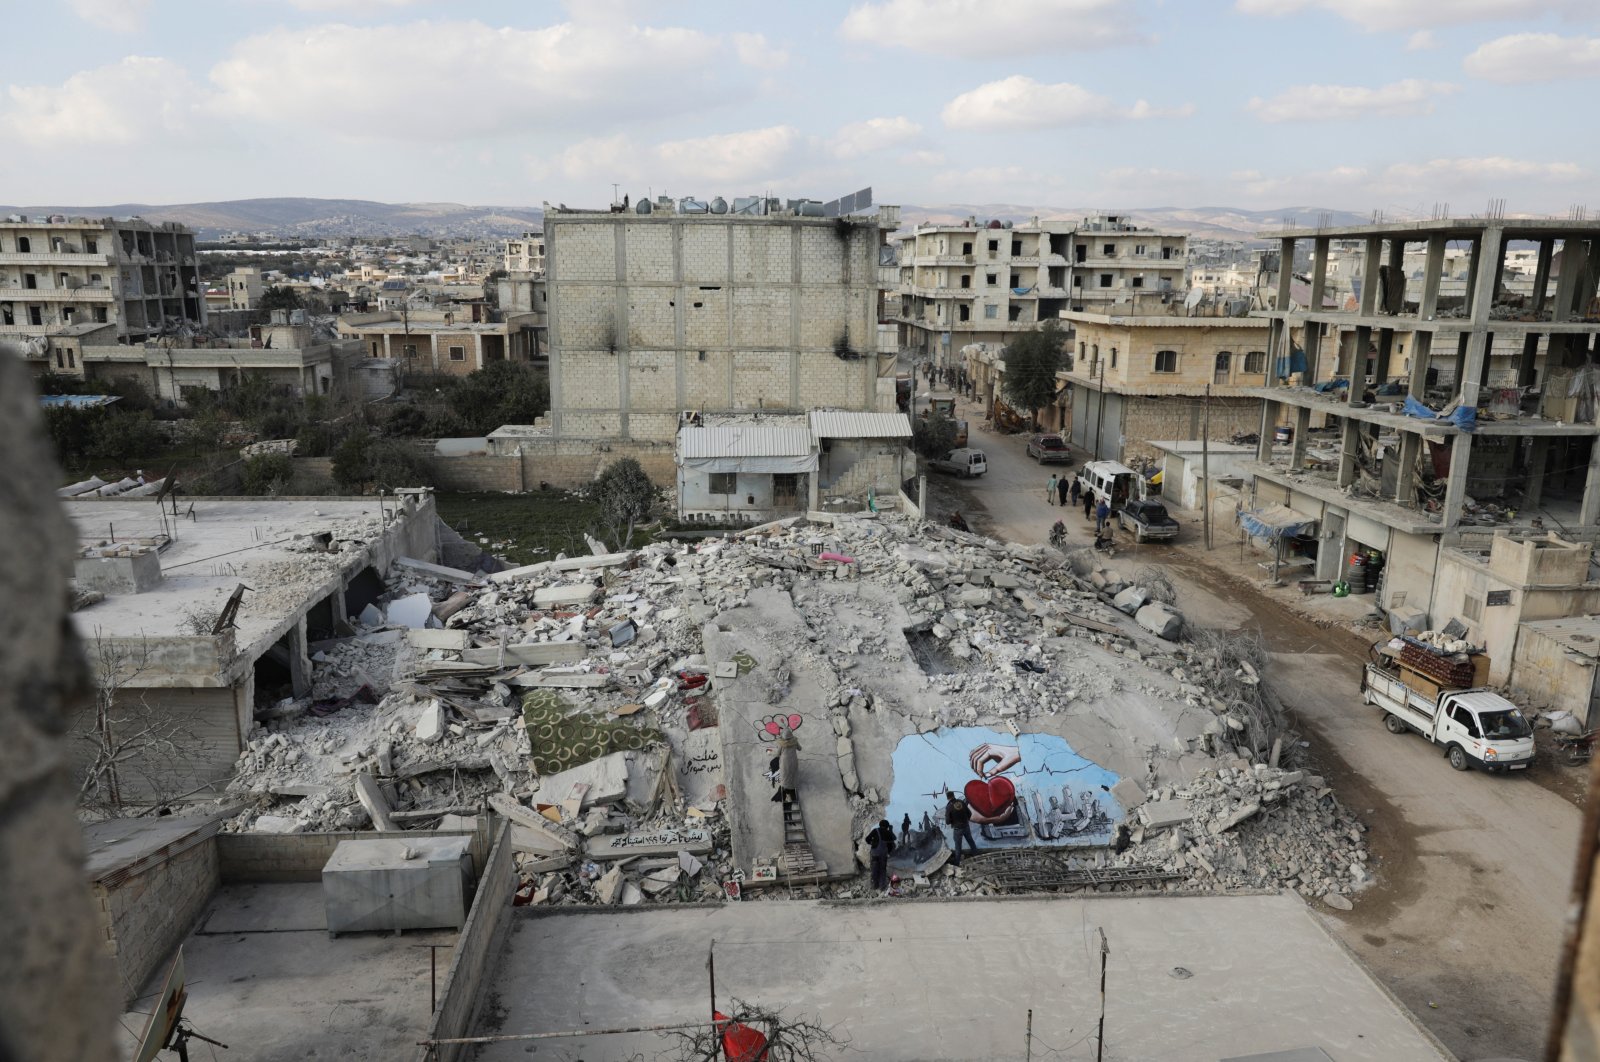 Syrian artists Aziz Asmar and Salam Hamed paint street art on the rubble of damaged buildings in the aftermath of a deadly earthquake, in the opposition-held town of Jandaris, Syria Feb. 22, 2023. (Reuters Photo)